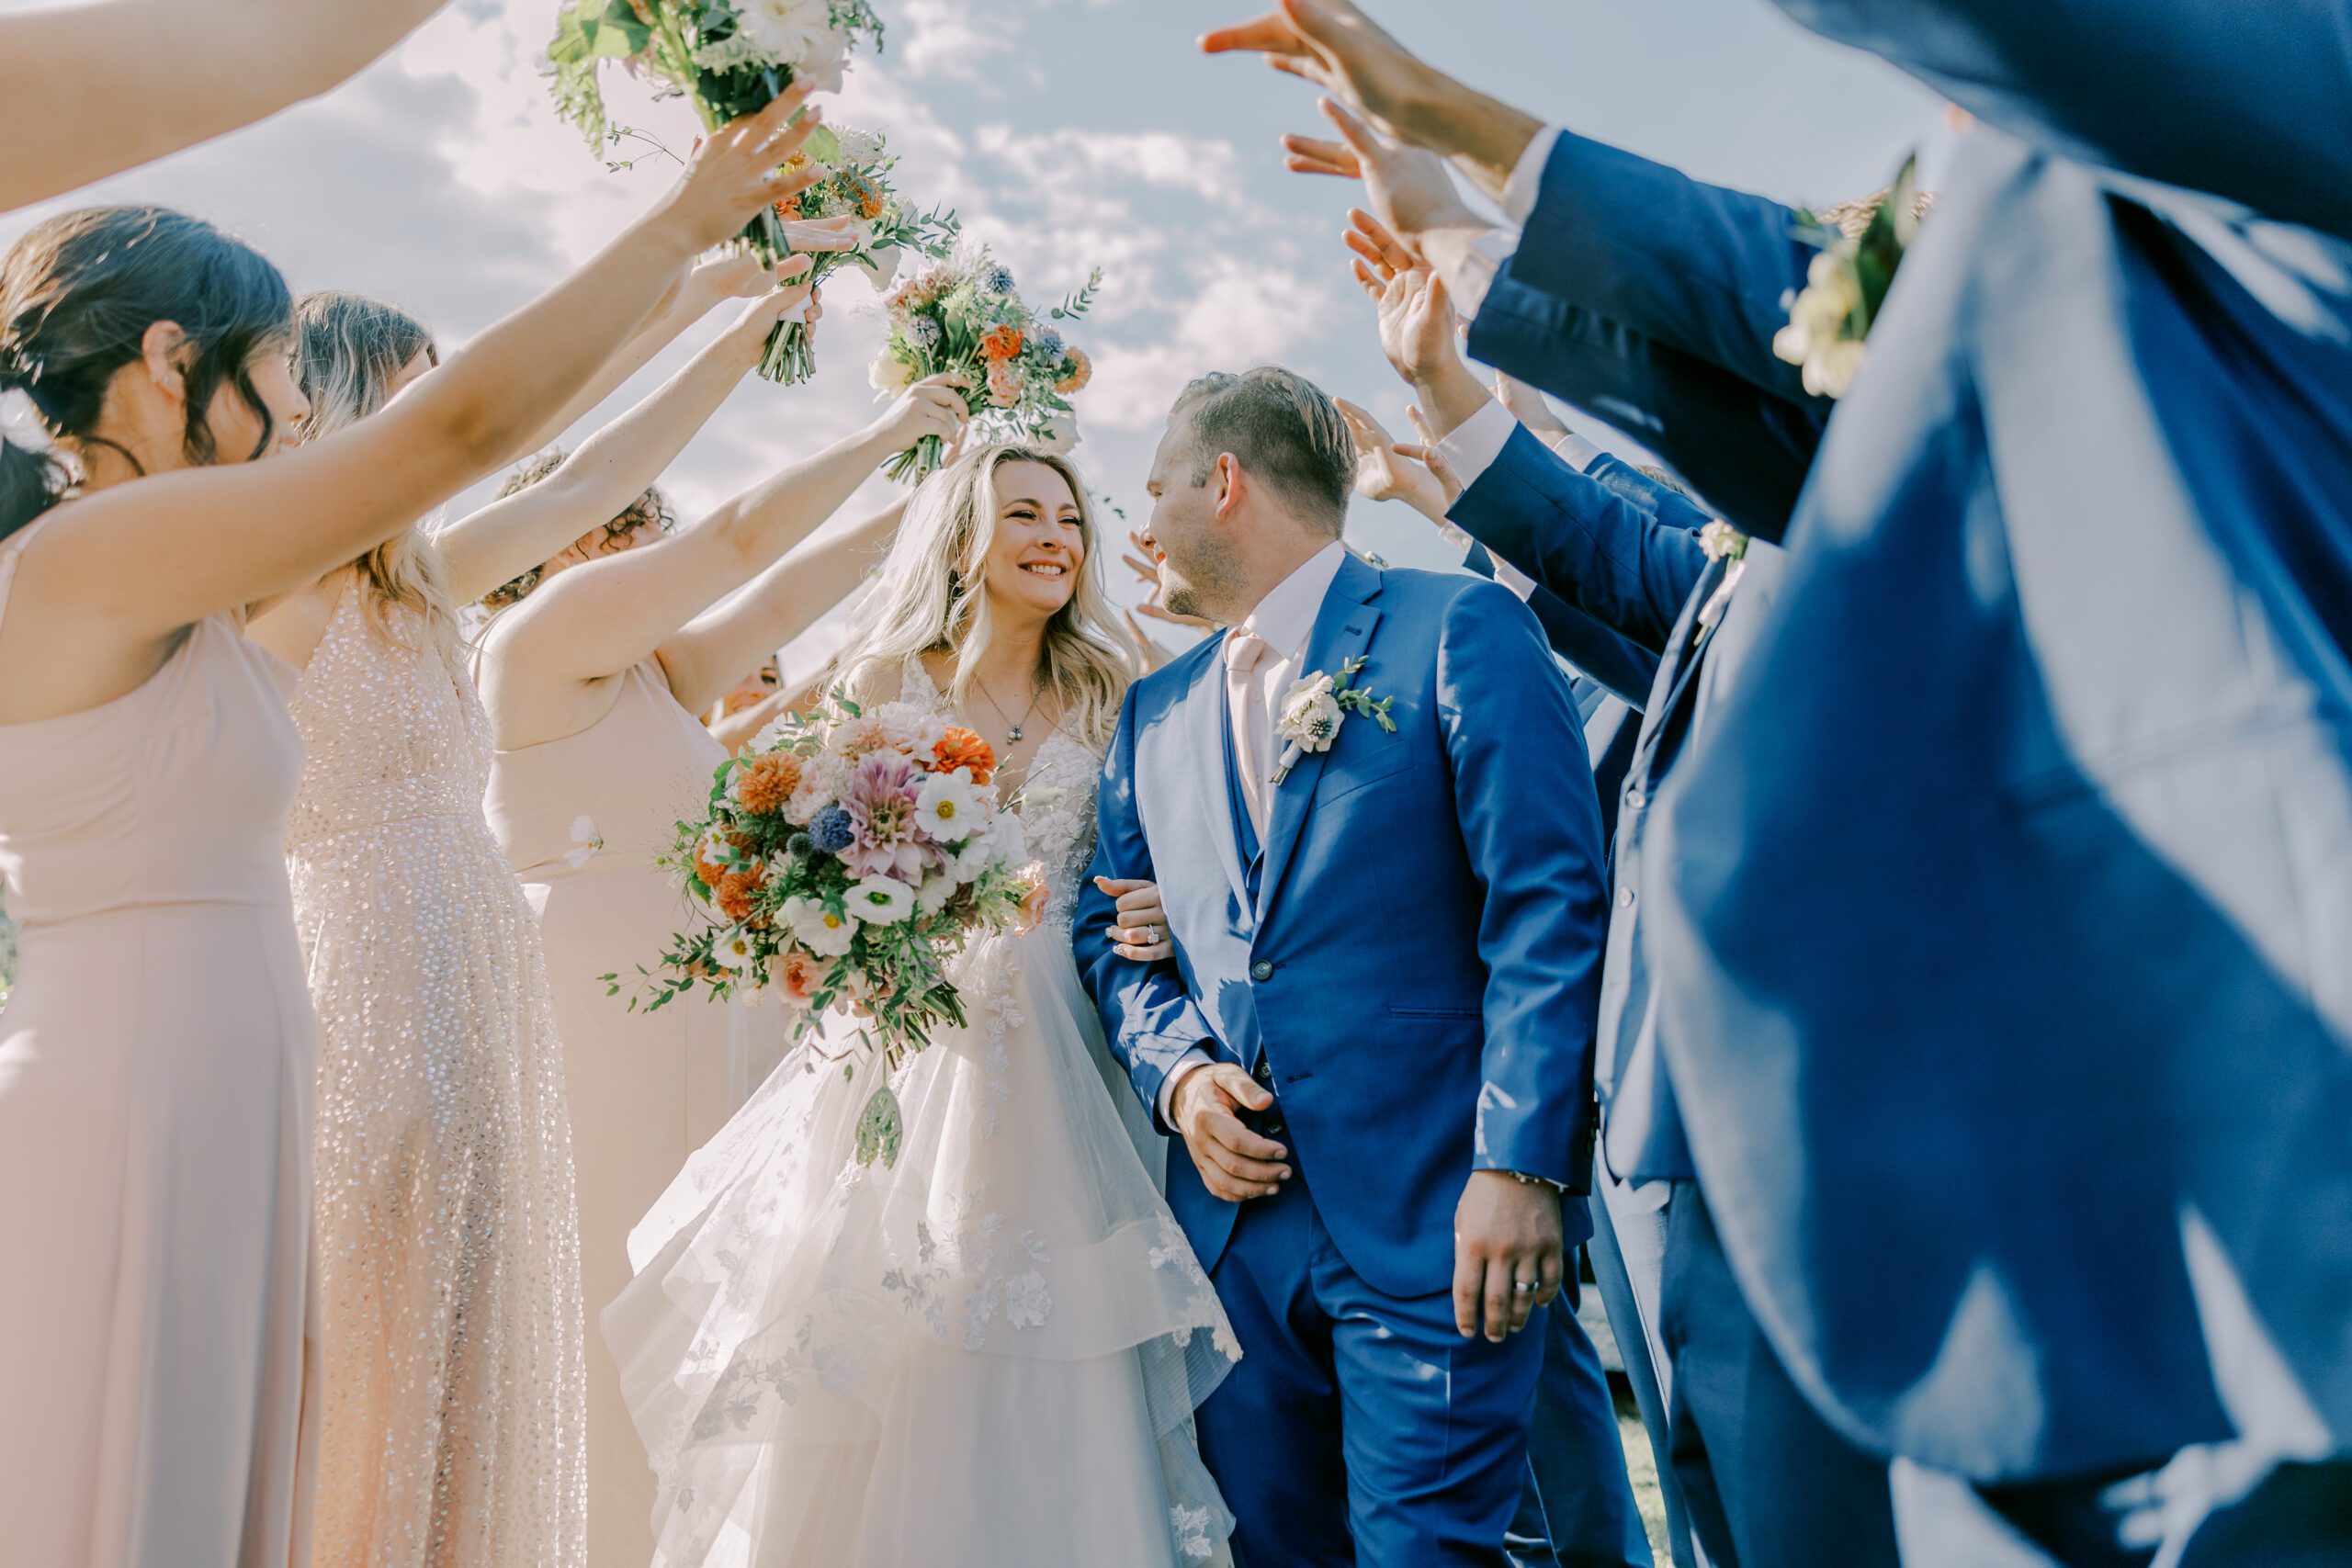 Bride and groom smiling at one another as they walk through a path of bridesmaids and groomsmen's hands overhead